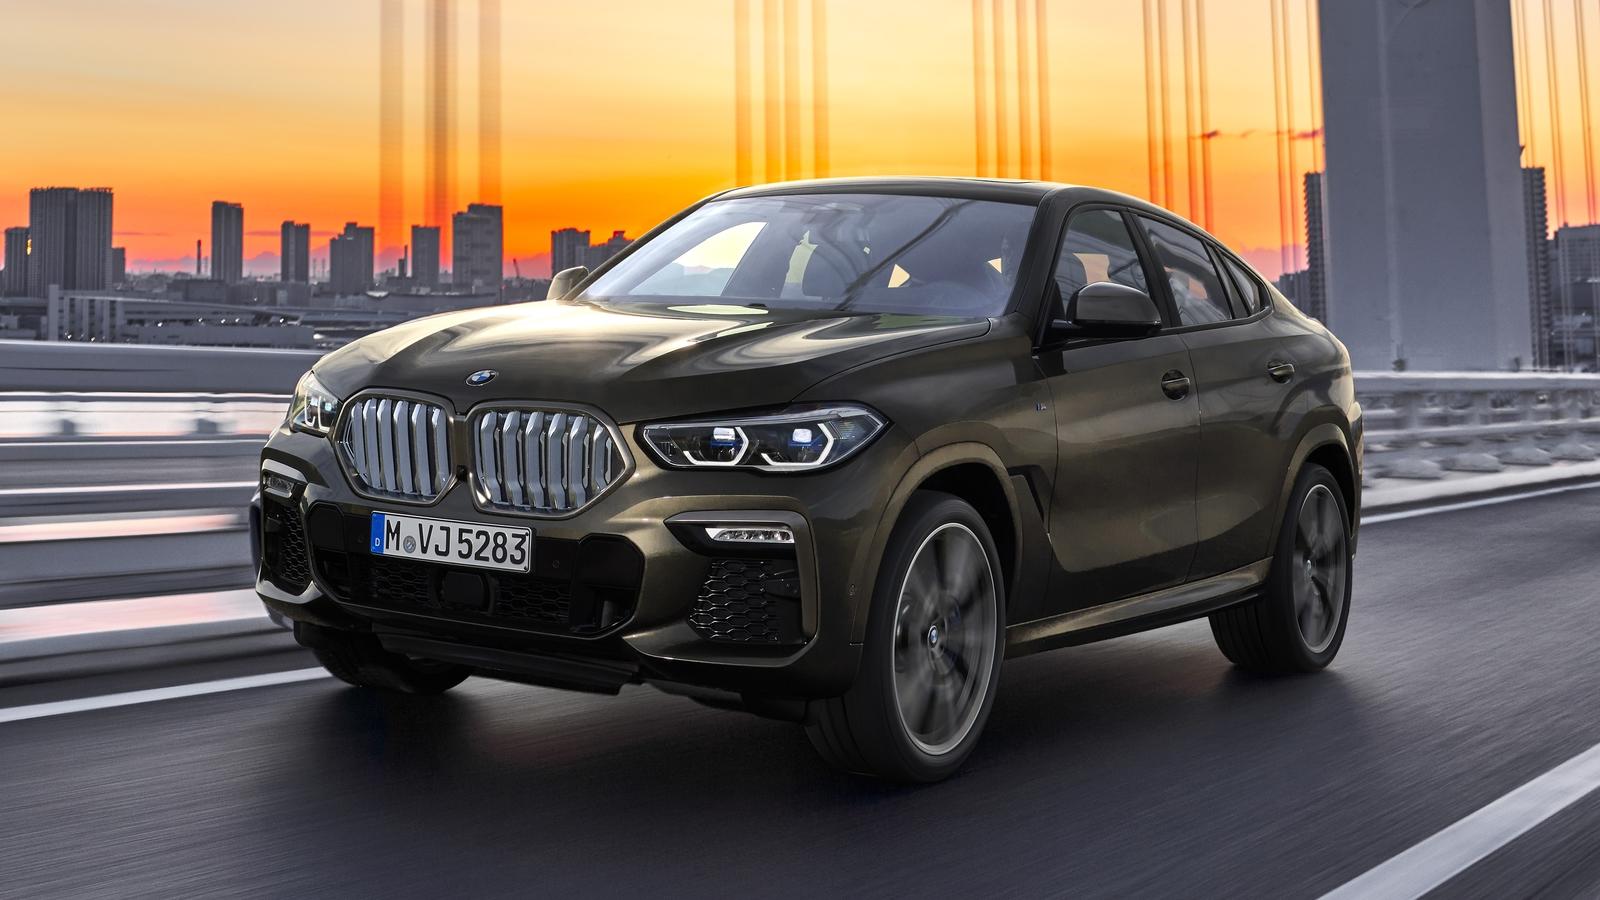 BMW X6: Latest News, Reviews, Specifications, Prices, Photo And Videos